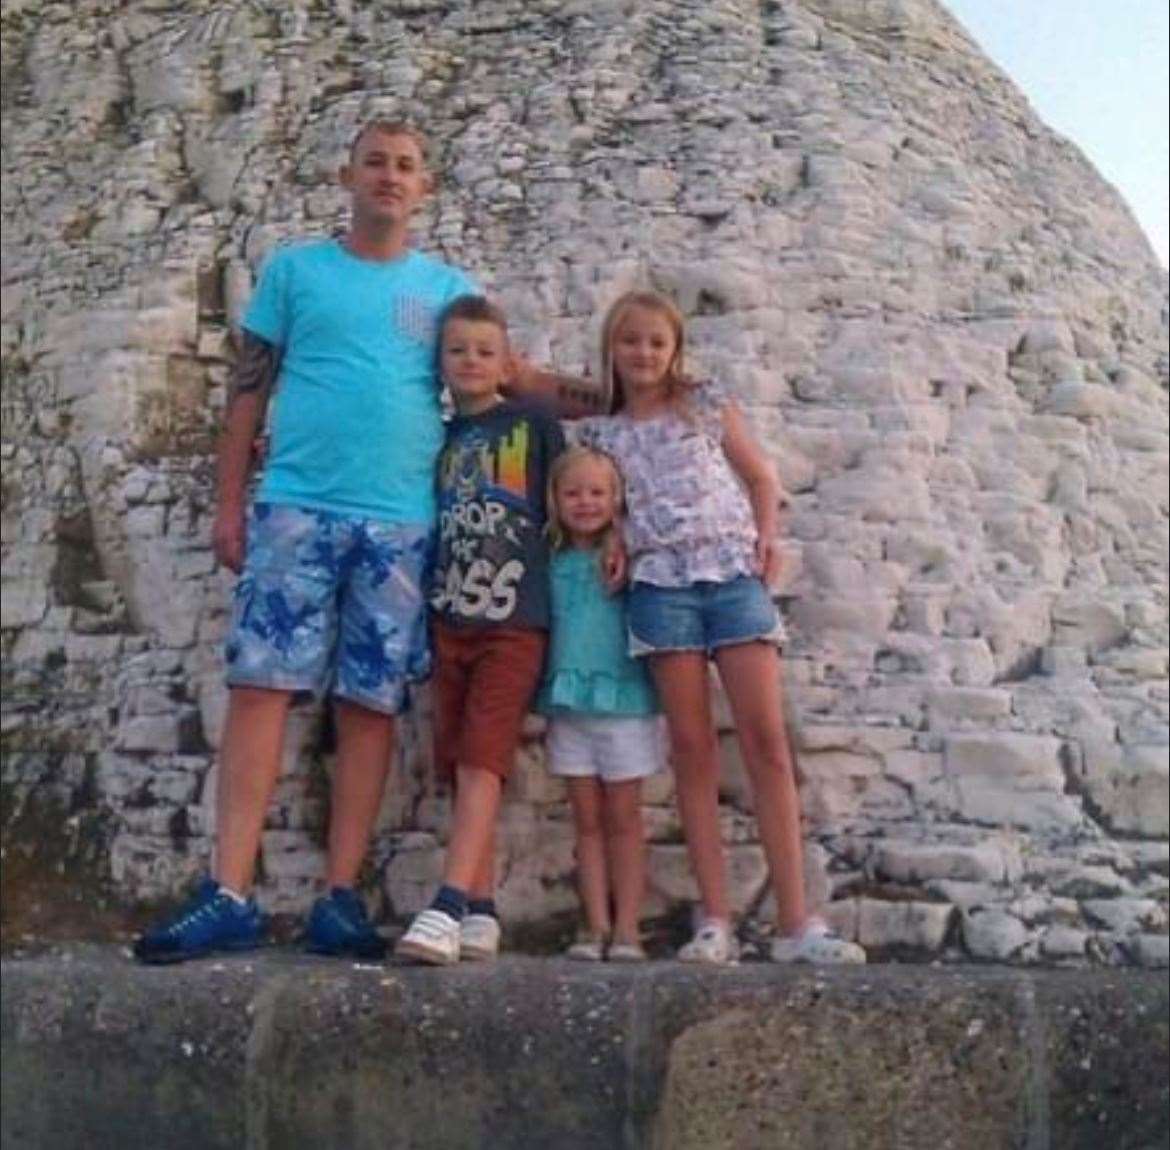 Michael Munday on holiday with his children, Mason, Lydia and Rebecca